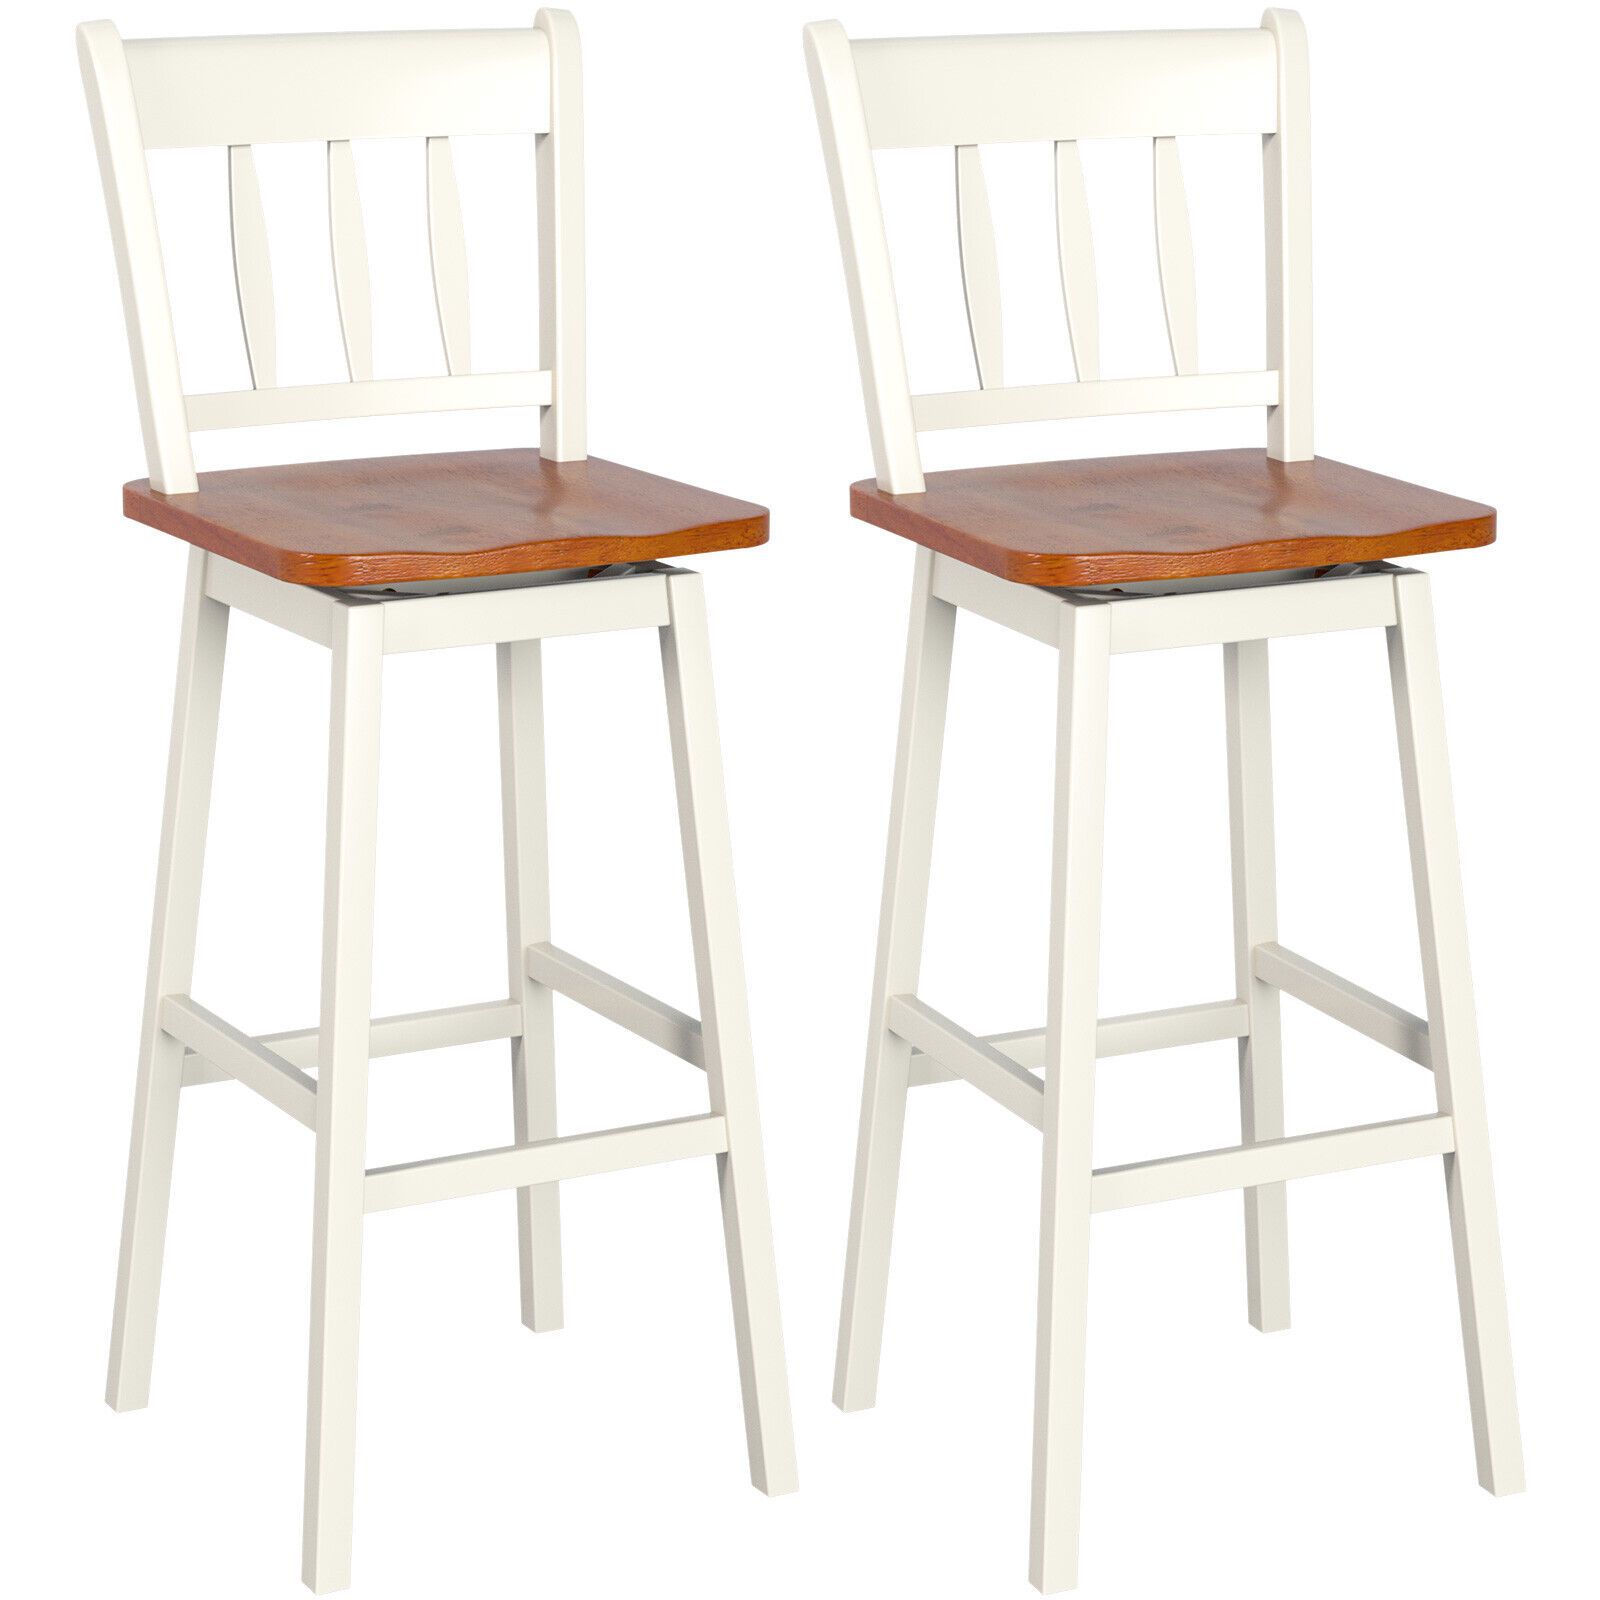 Set of 2 Rubber Wood Swivel Bar Stools with Backrest and Footrest Cream